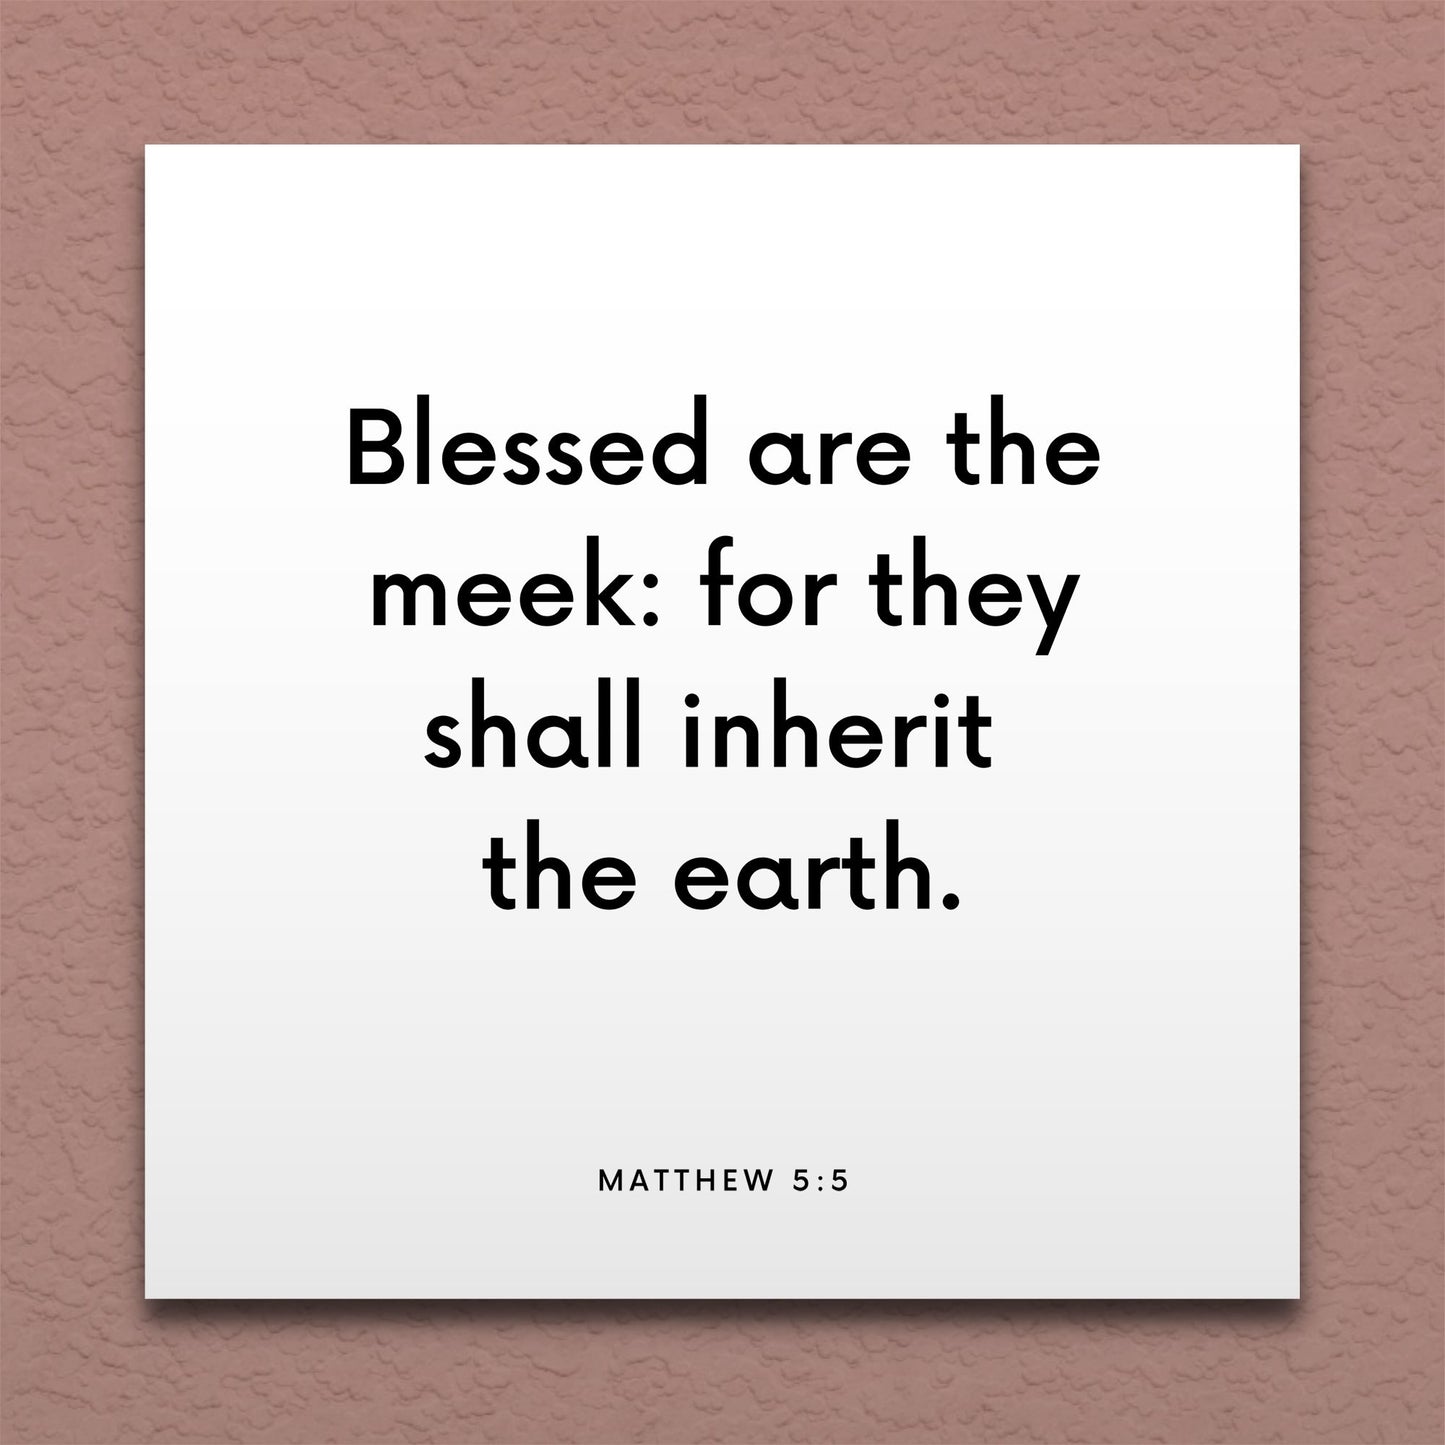 Wall-mounted scripture tile for Matthew 5:5 - "Blessed are the meek: for they shall inherit the earth"